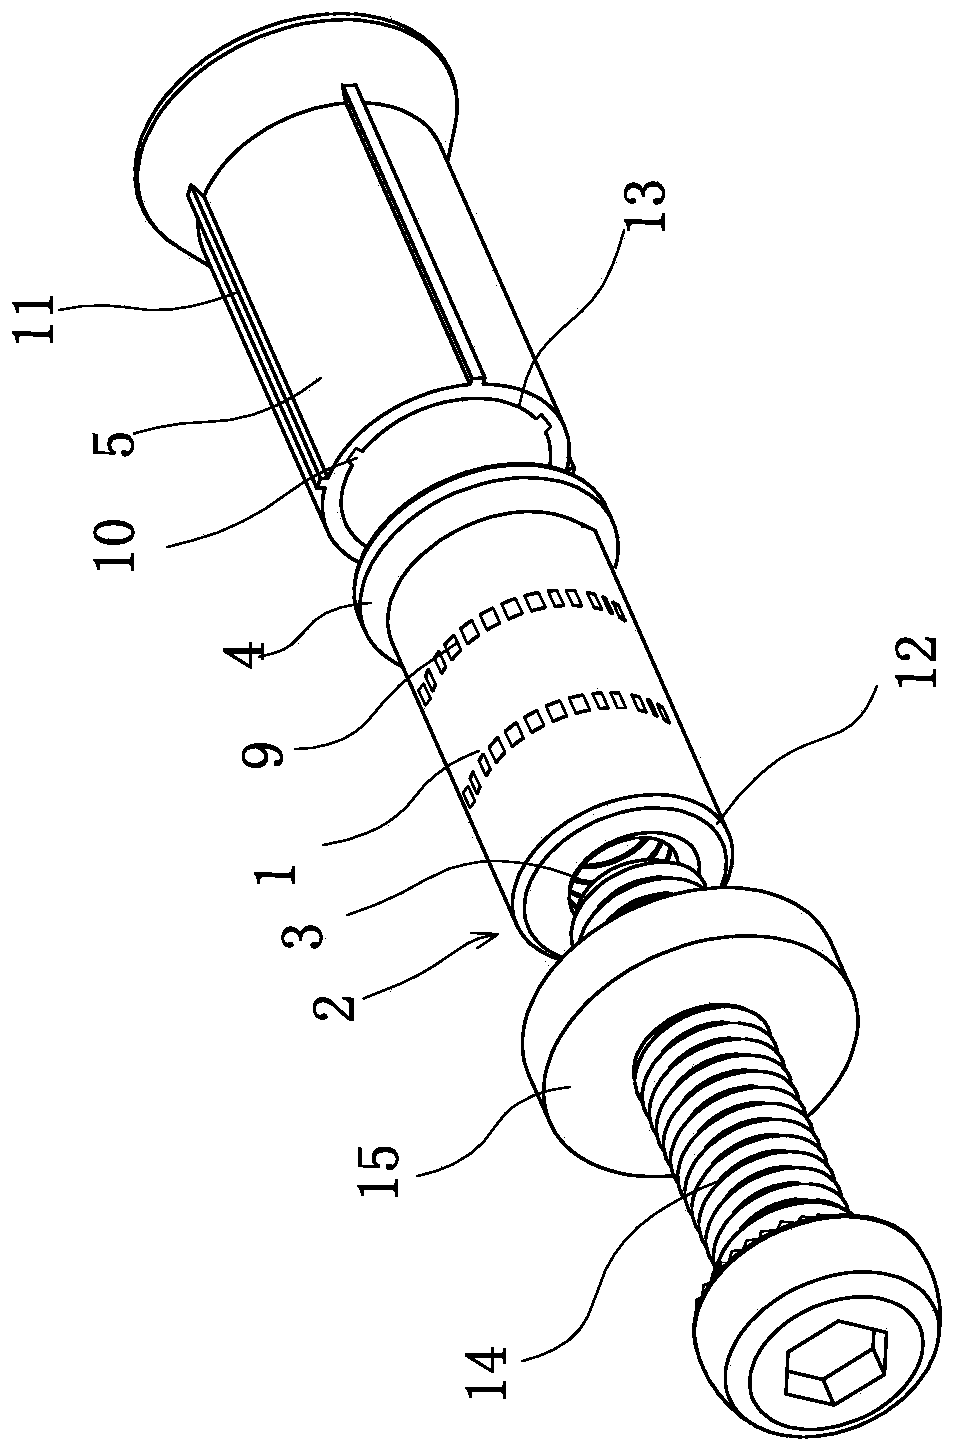 Embedded type anti-loosening back bolt with flexible cladding layer and back bolt assembly of embedded type anti-loosening back bolt